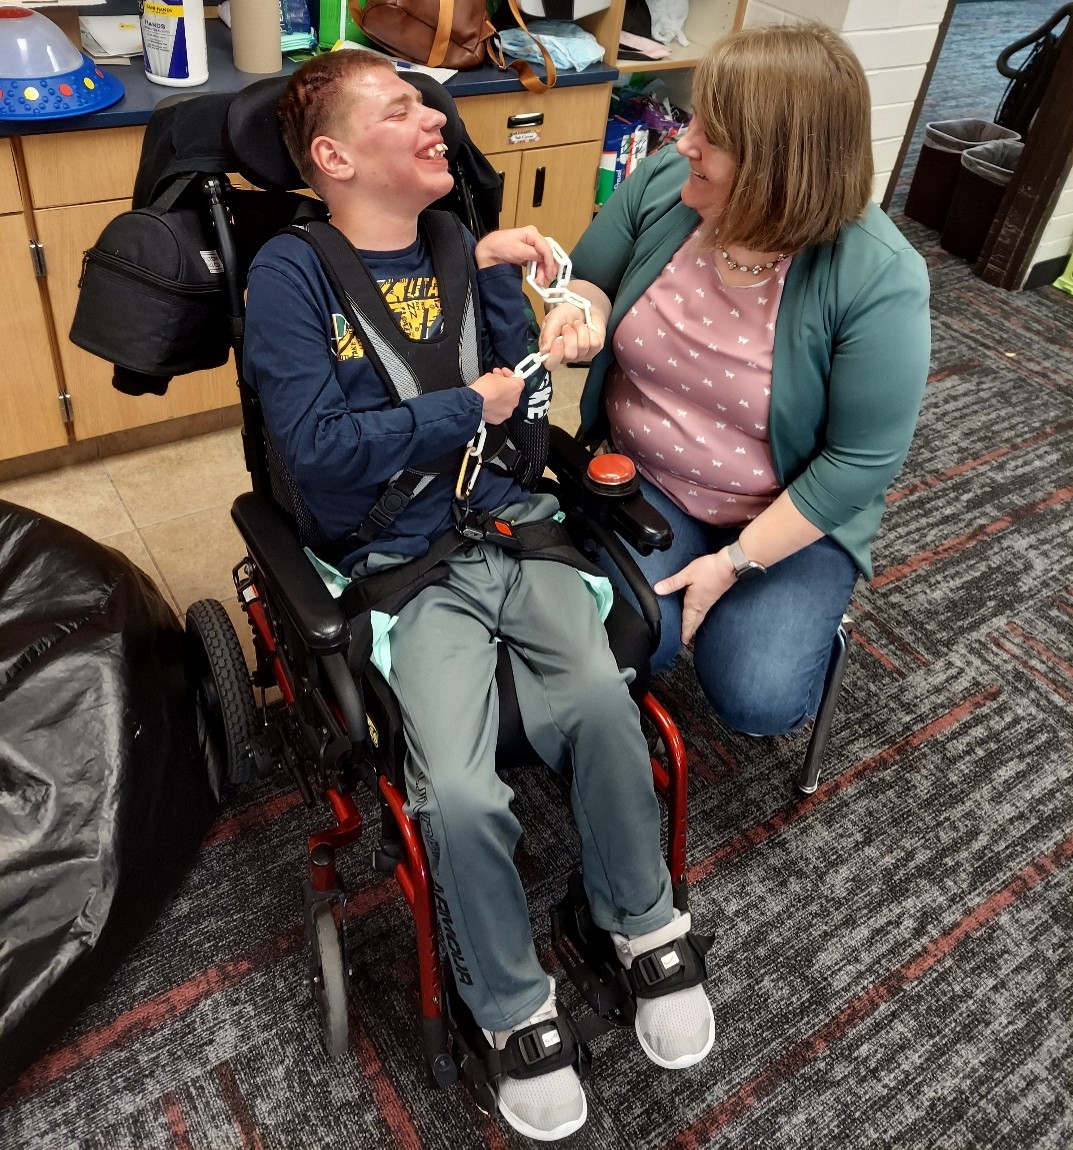 A teacher sits on a low stool by a teenage boy in a wheelchair. They are smiling at each other.